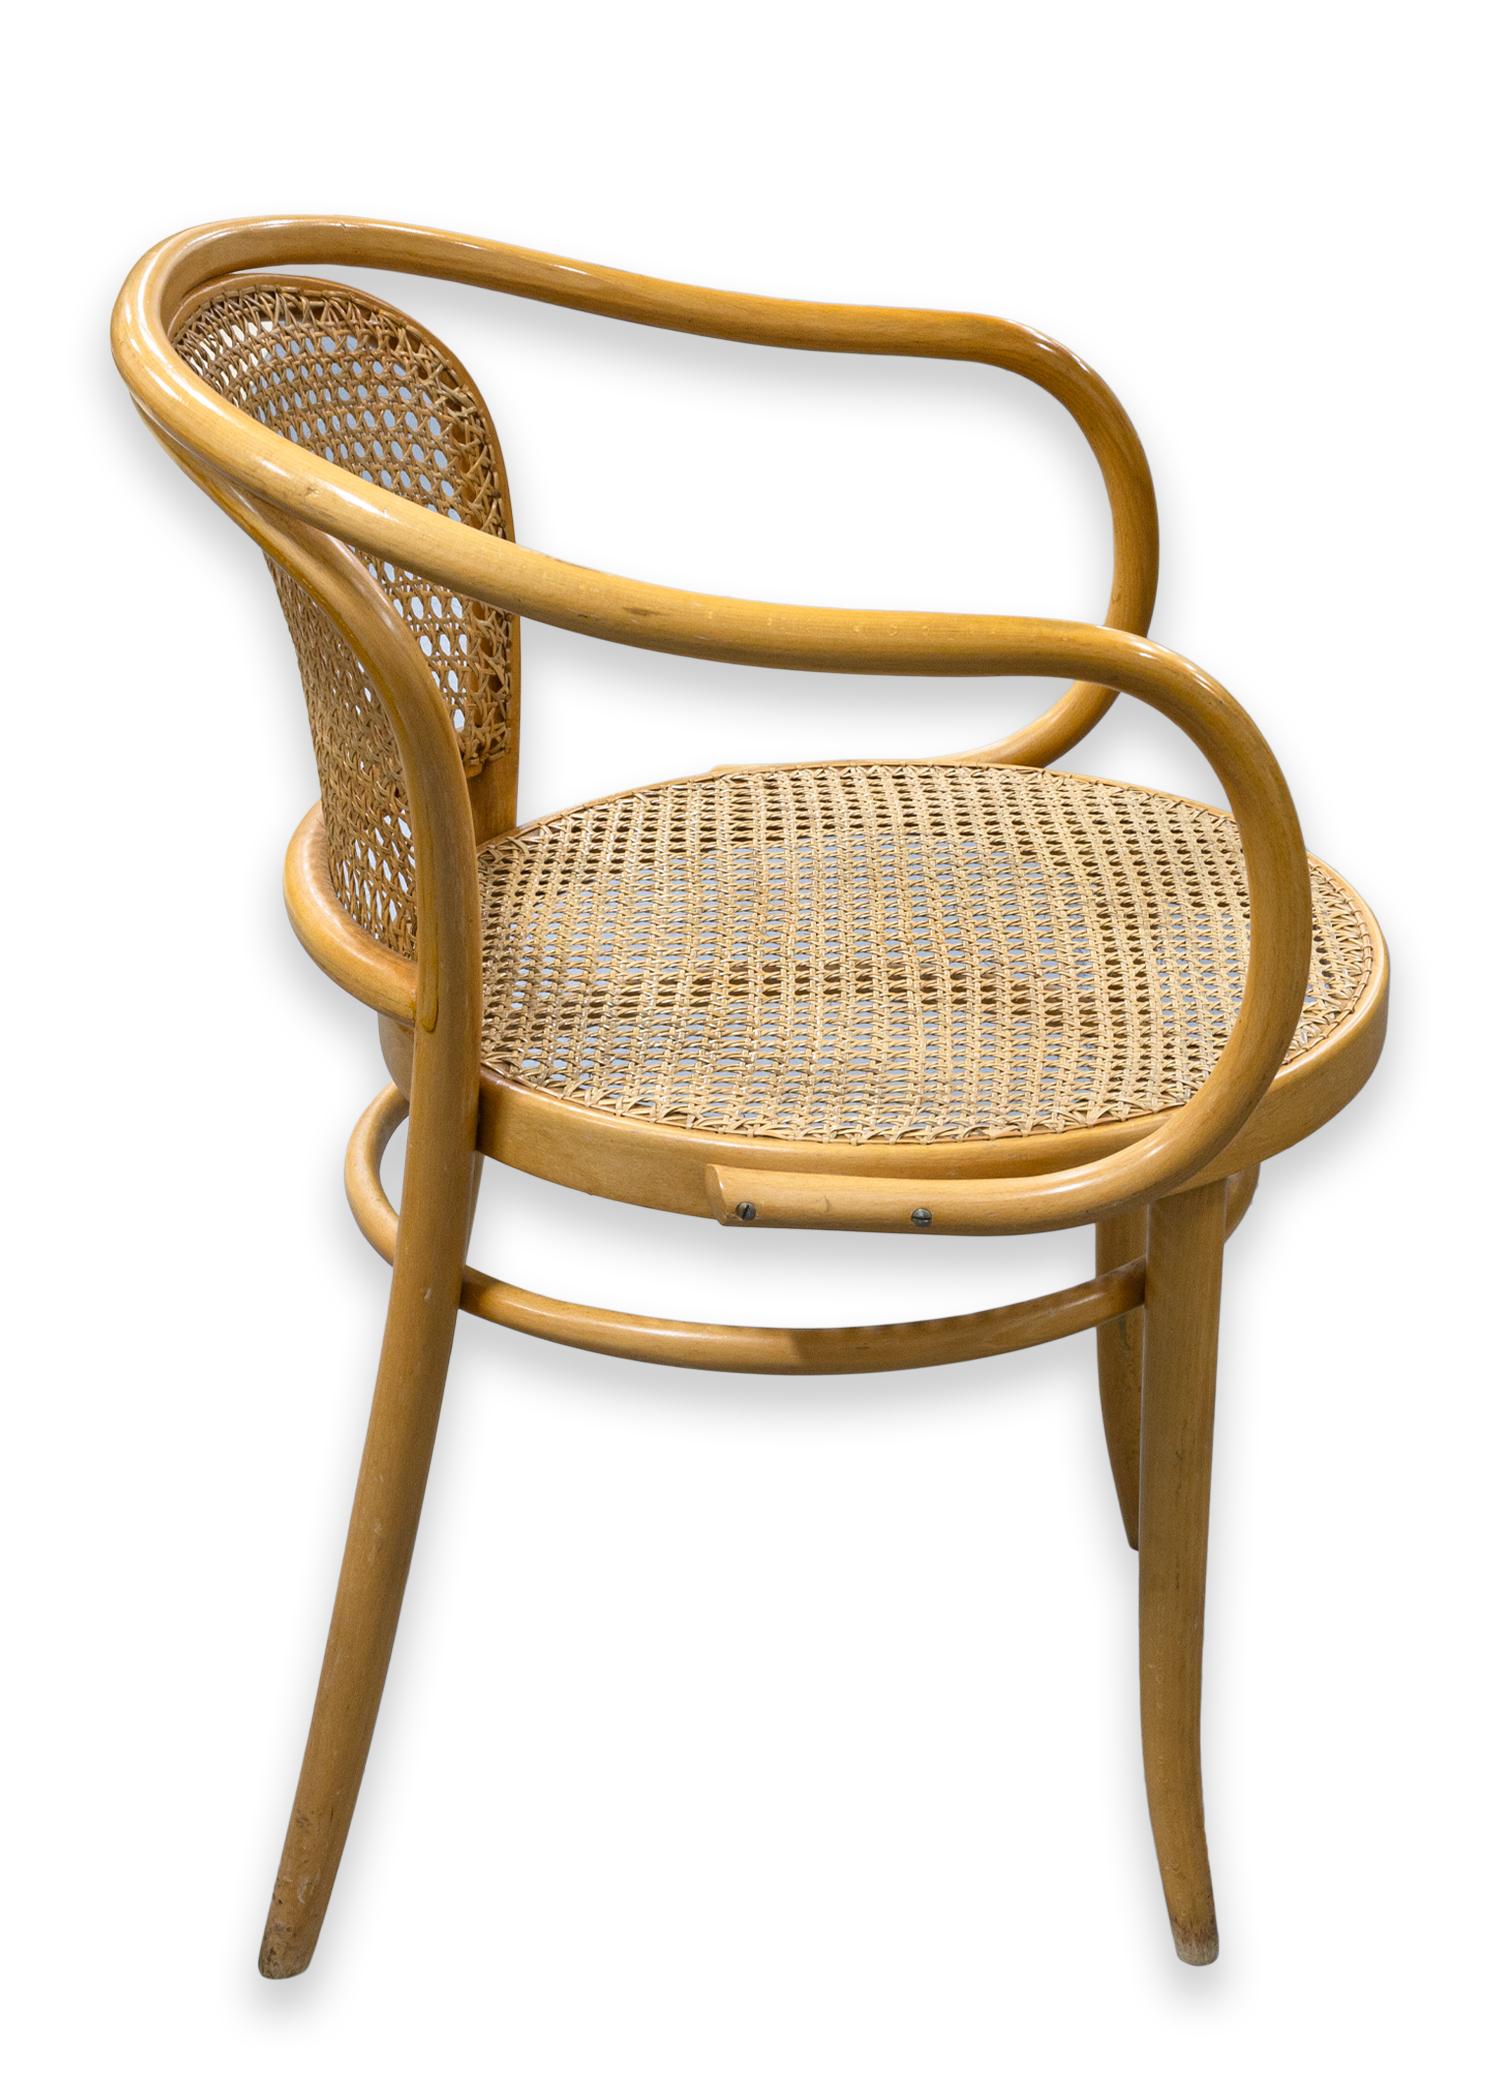 Set of 6 Stendig Beechwood and Rattan Mid Century Modern Armchair Dining Chairs In Good Condition For Sale In Keego Harbor, MI